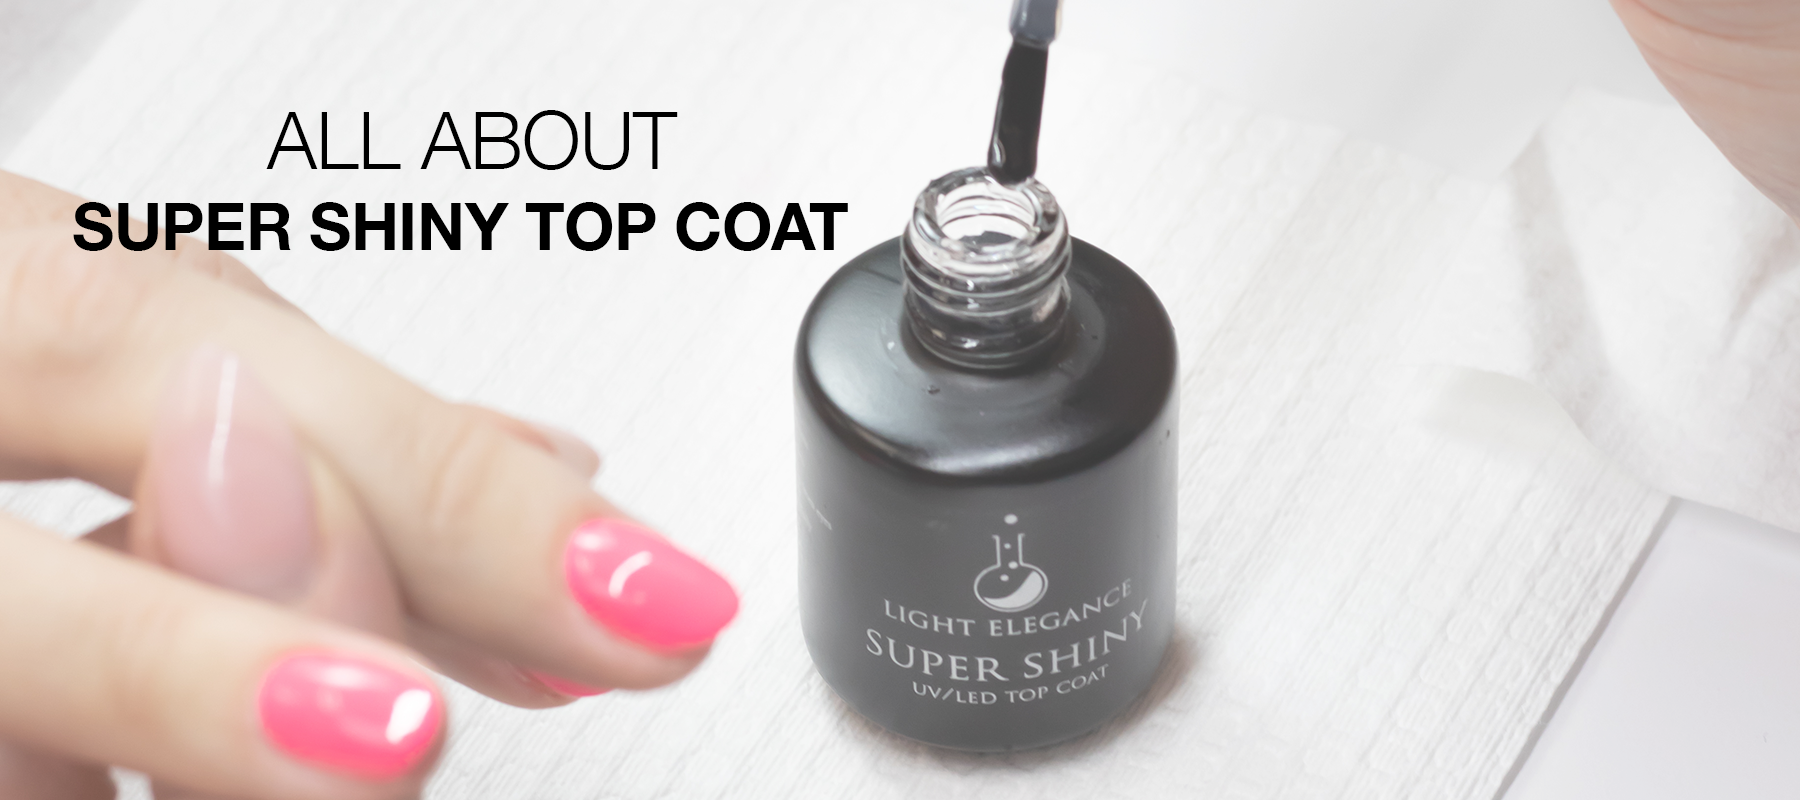 All About Super Shiny Top Coat | Stain Resistant Top Coat with Extreme Shine That Lasts